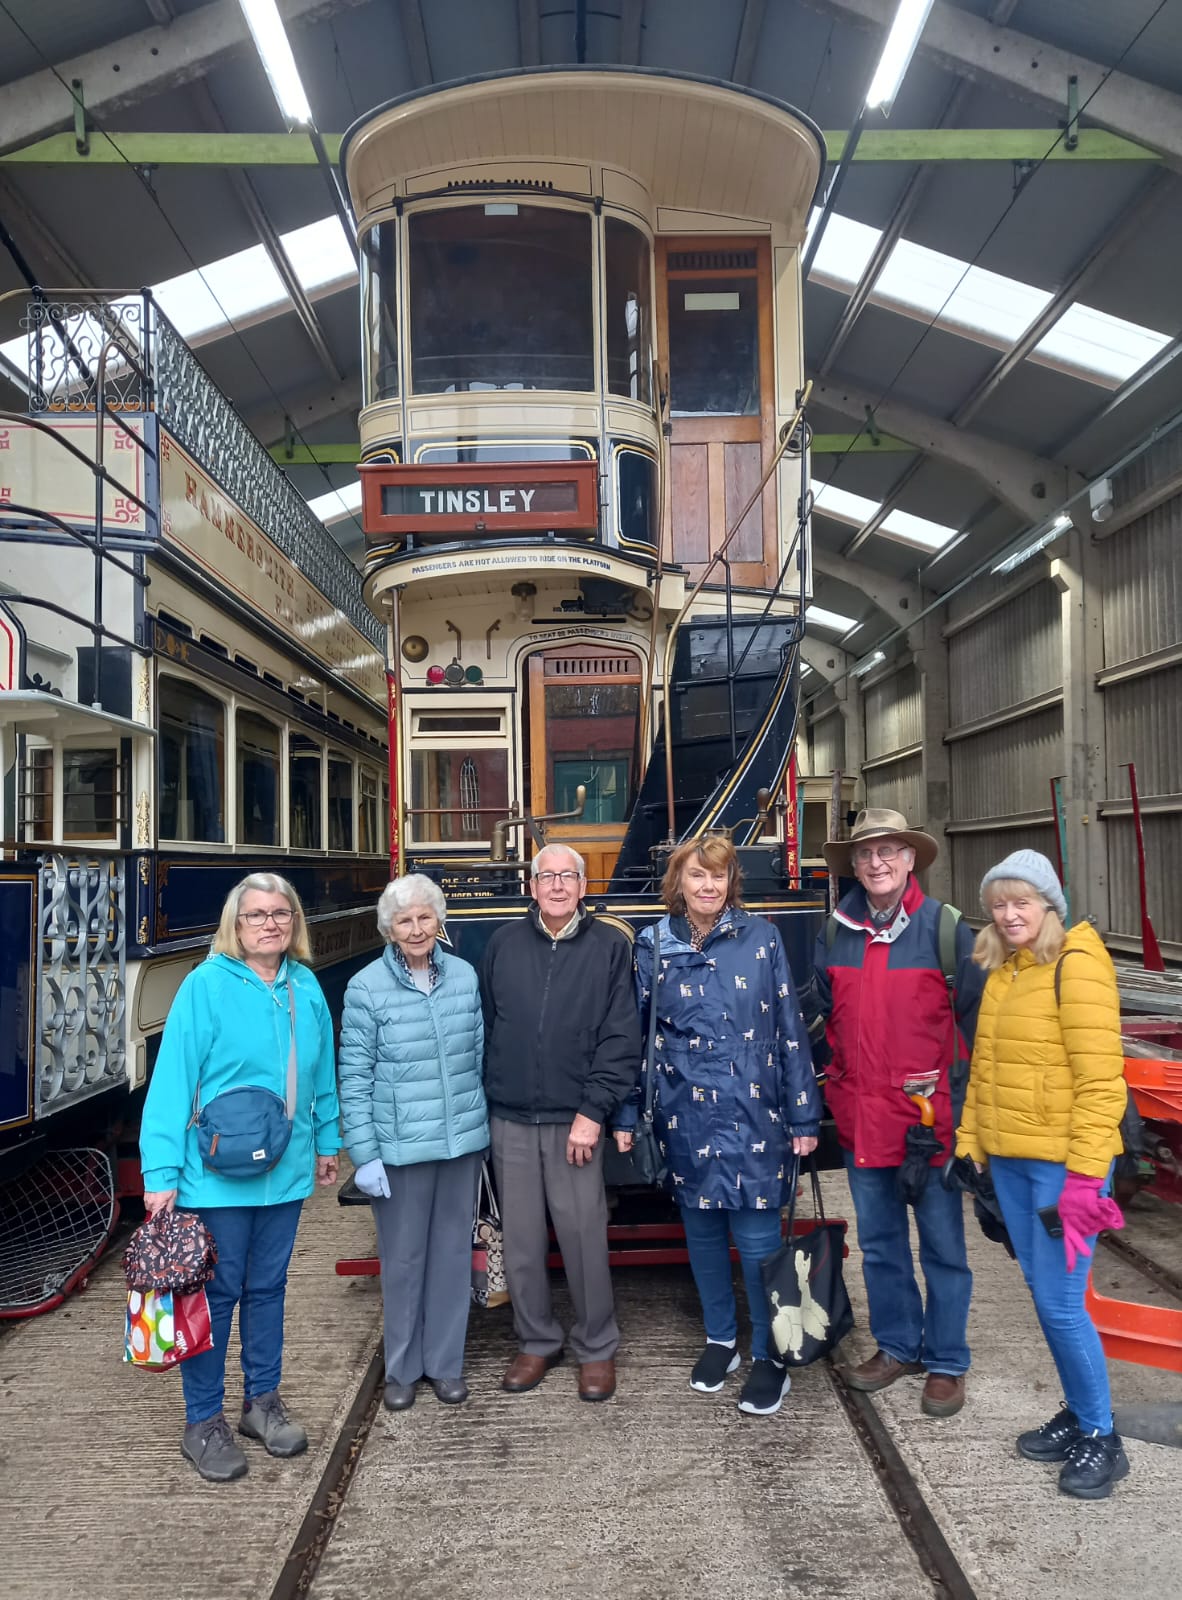 A recent trip to the Crich Museum